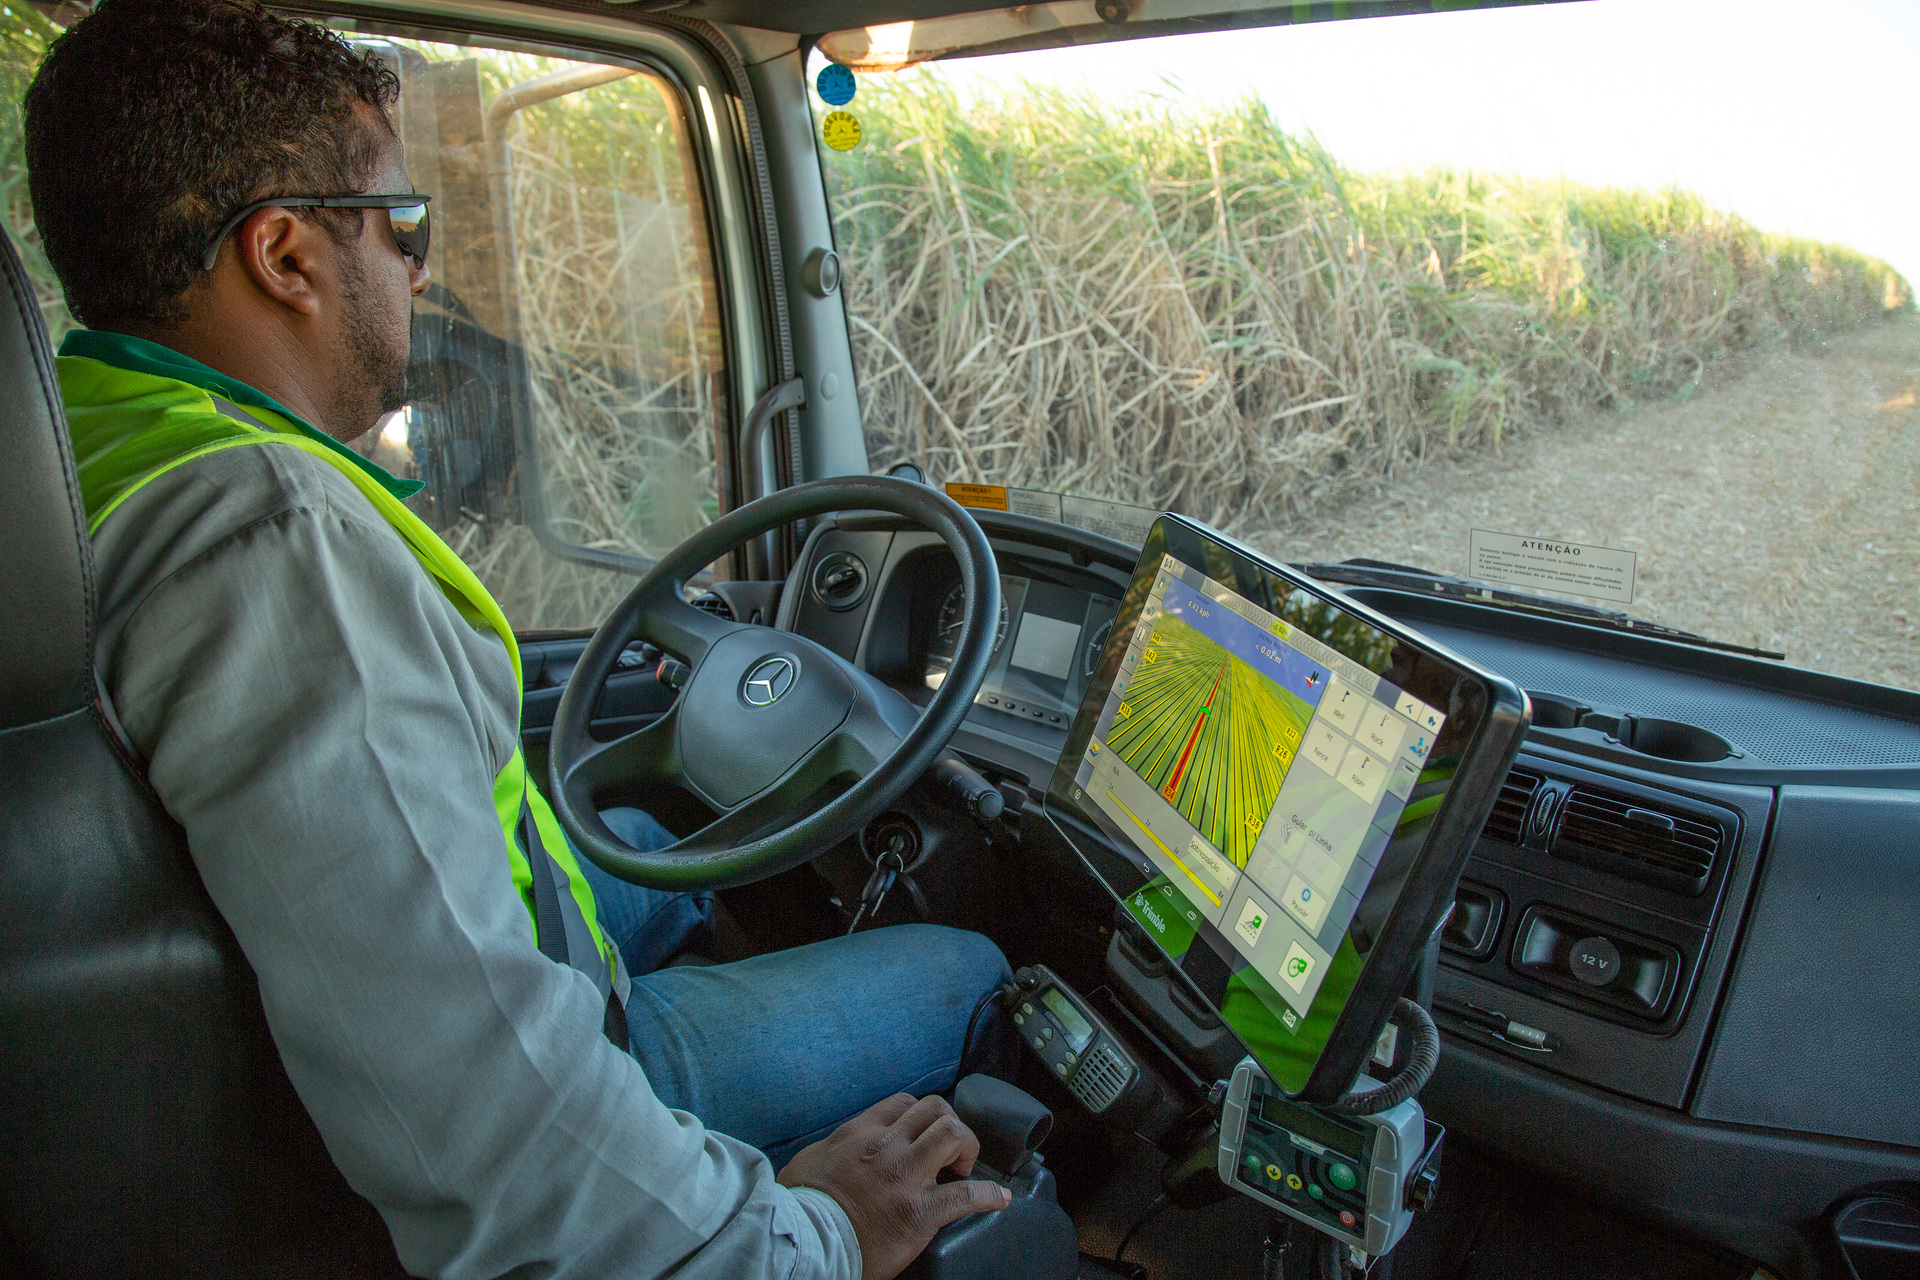 18 automated driving Mercedes-Benz Axor vehicles for harvest sugar cane in Brazil